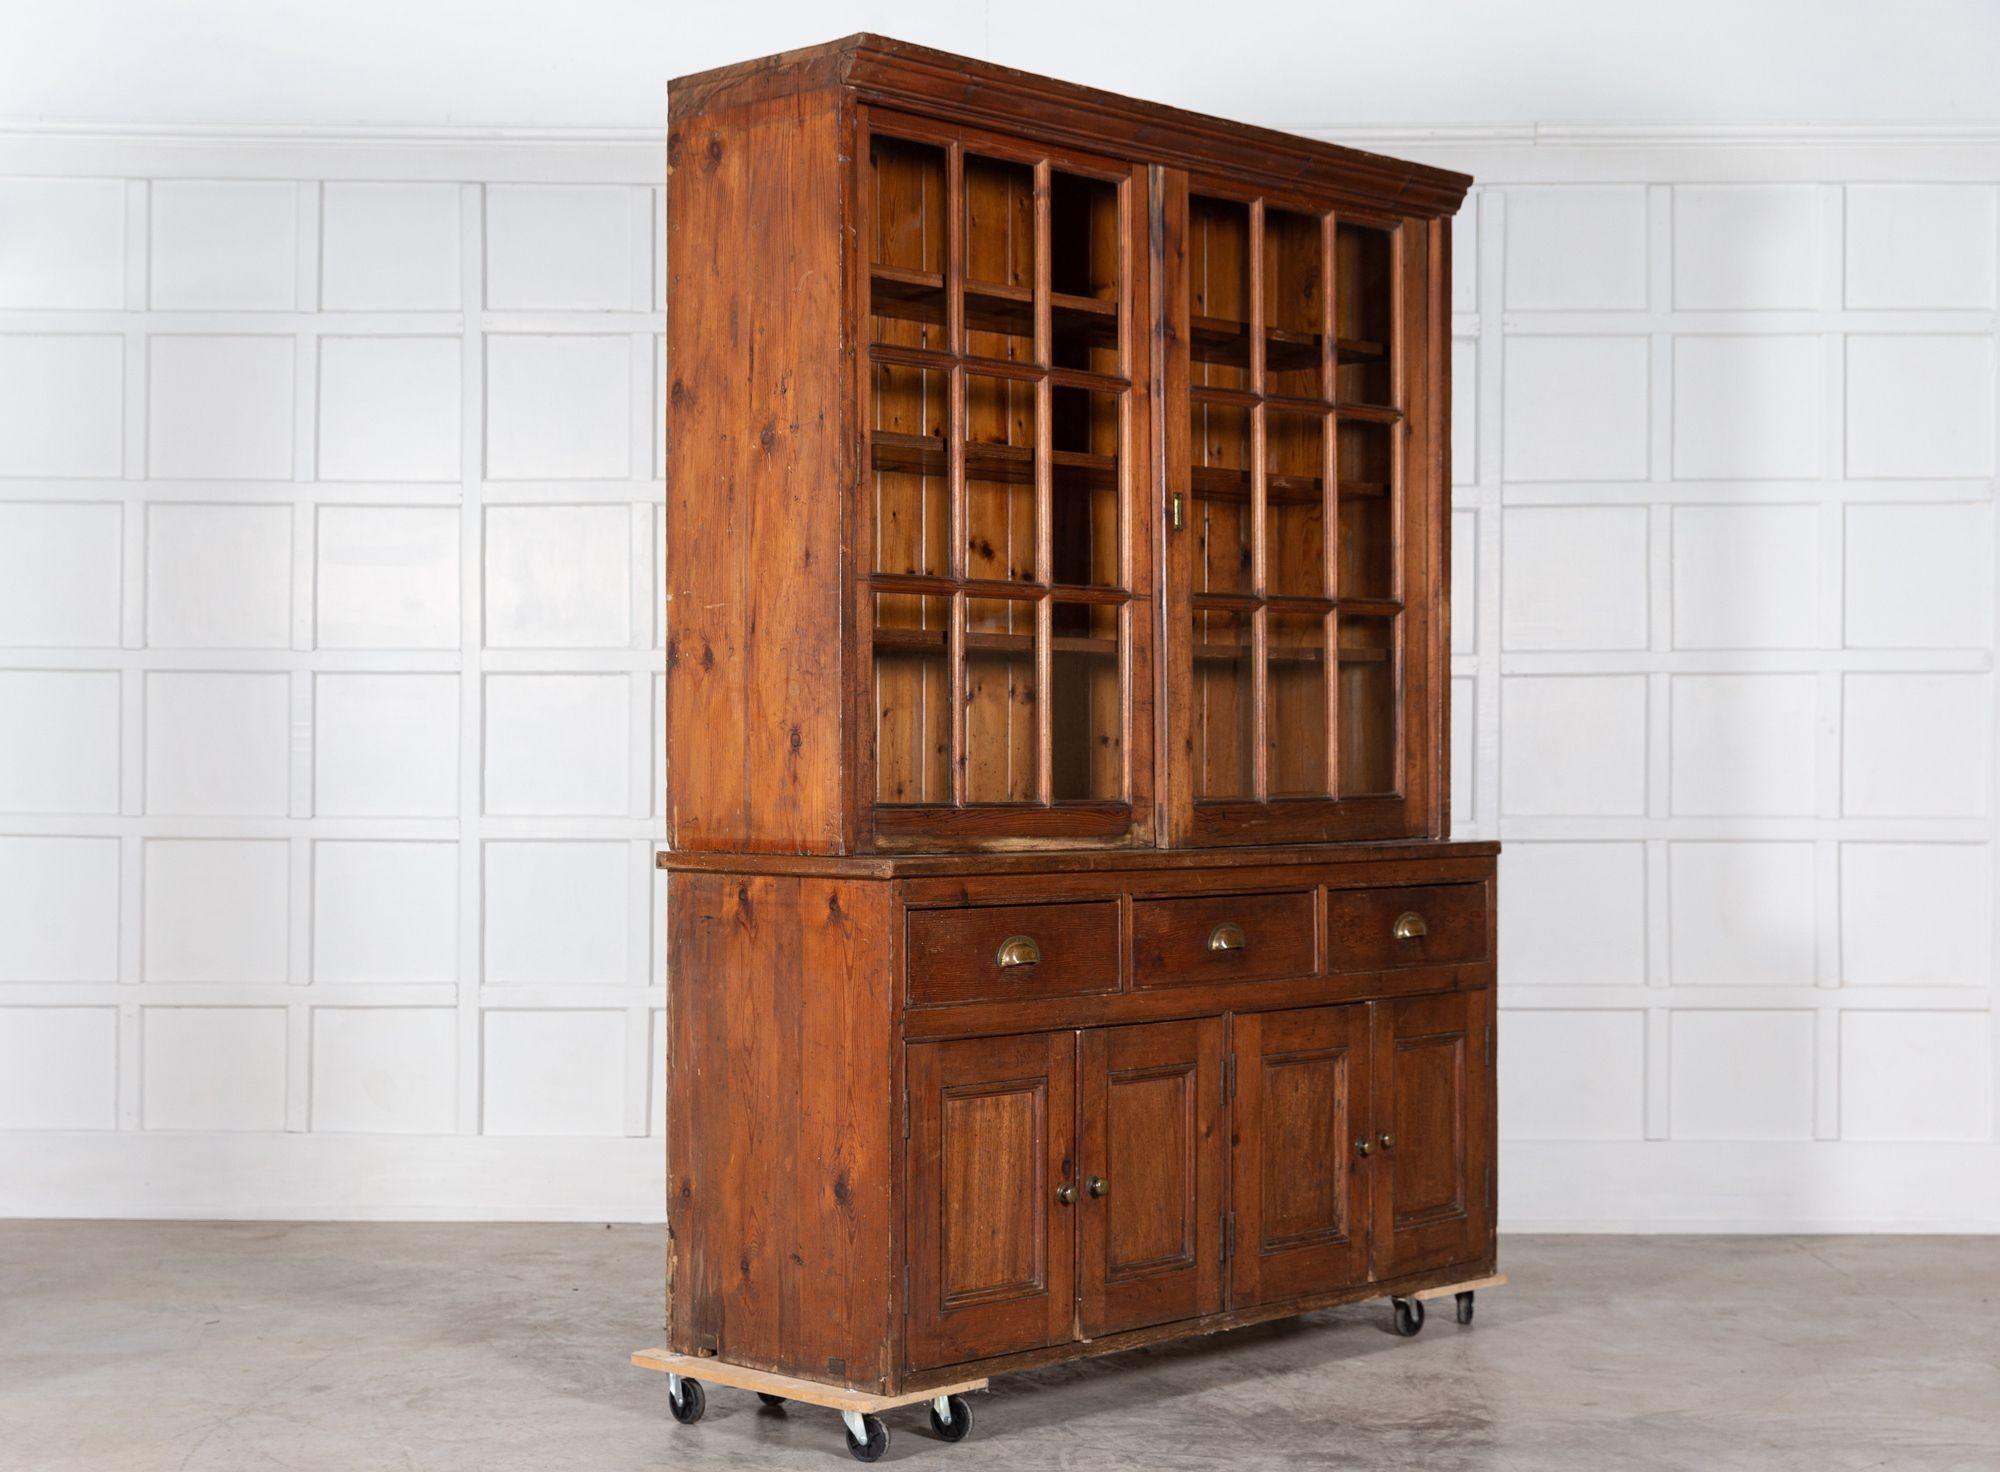 Large 19thC English Glazed Pine Haberdashery Cabinet In Good Condition For Sale In Staffordshire, GB